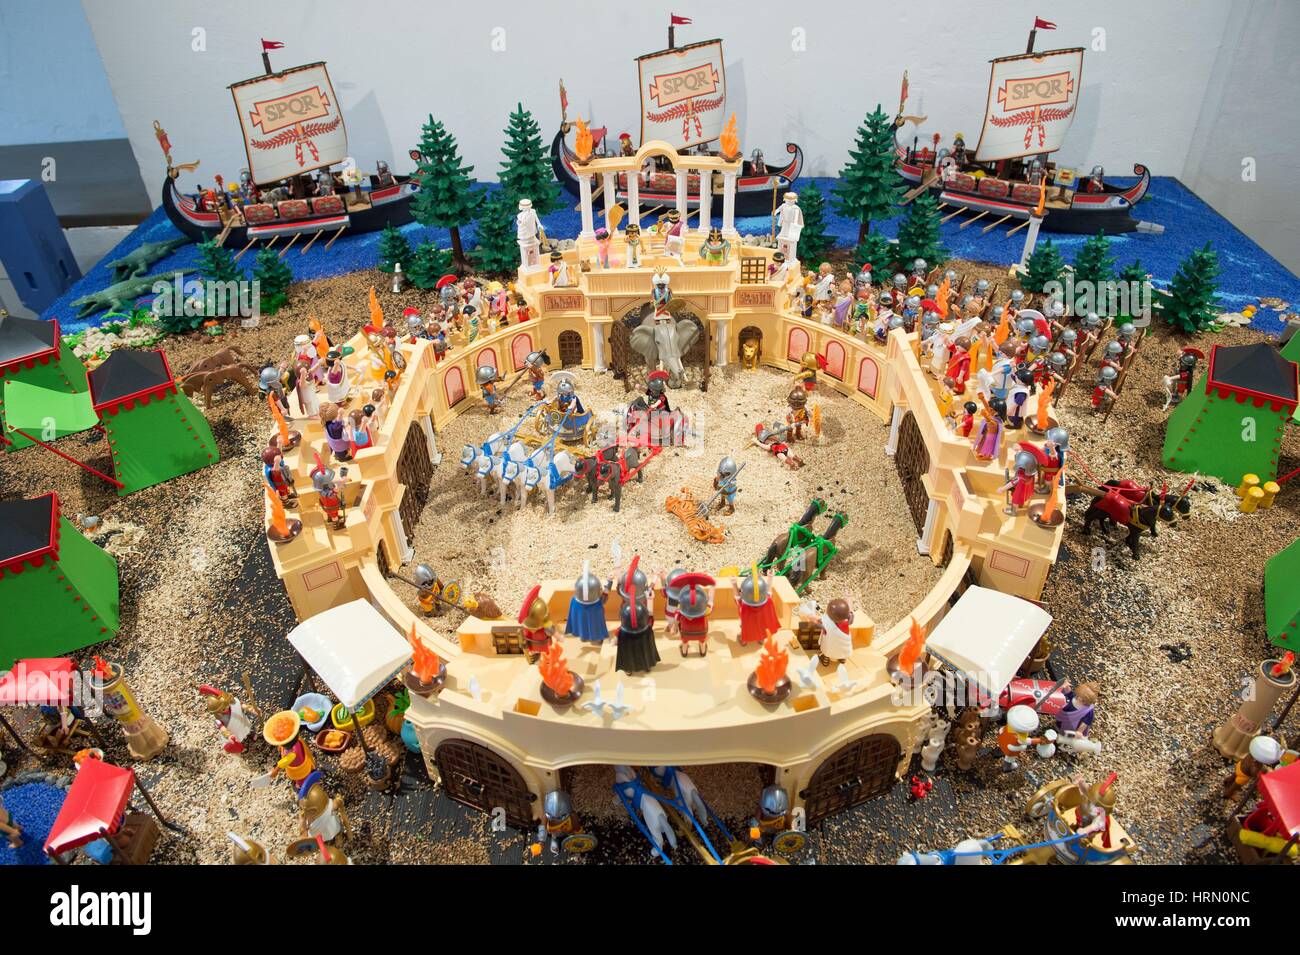 Playmobil figures on display in Drebach, Germany, 01 March 2017. The exhibition, entitled 'Playmobil Circus Stories: The Schaffer Collection', is open to the public between the 04 March 2017 and the